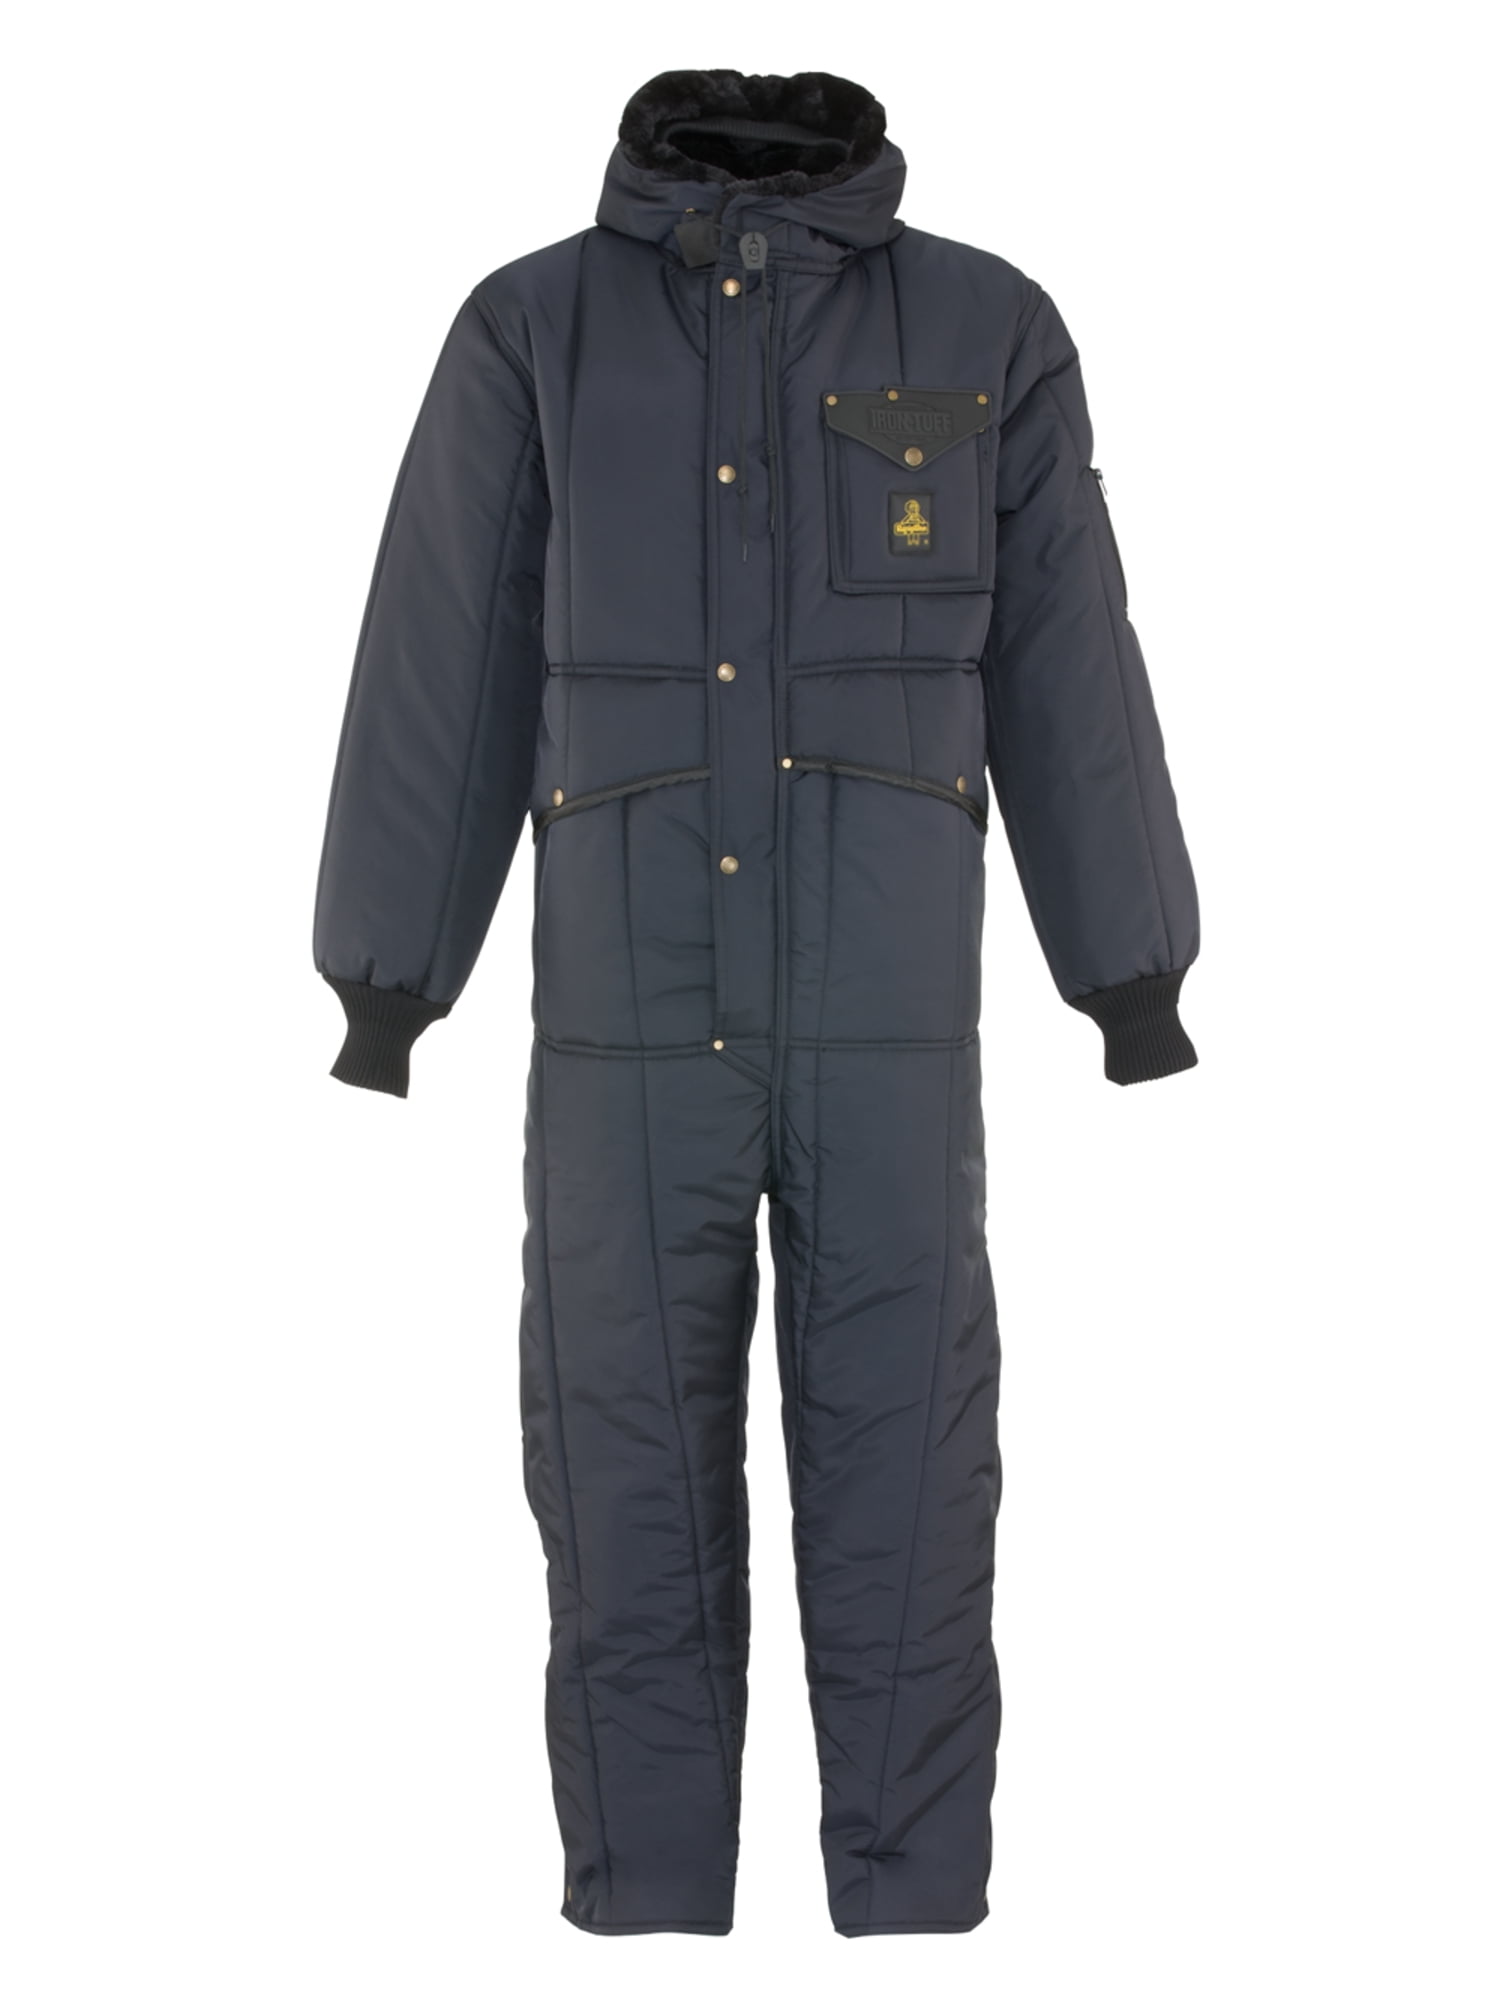 Workwear Coveralls Tuff Work Jumpsuit Hooded Overalls Mechanic Protective Pants